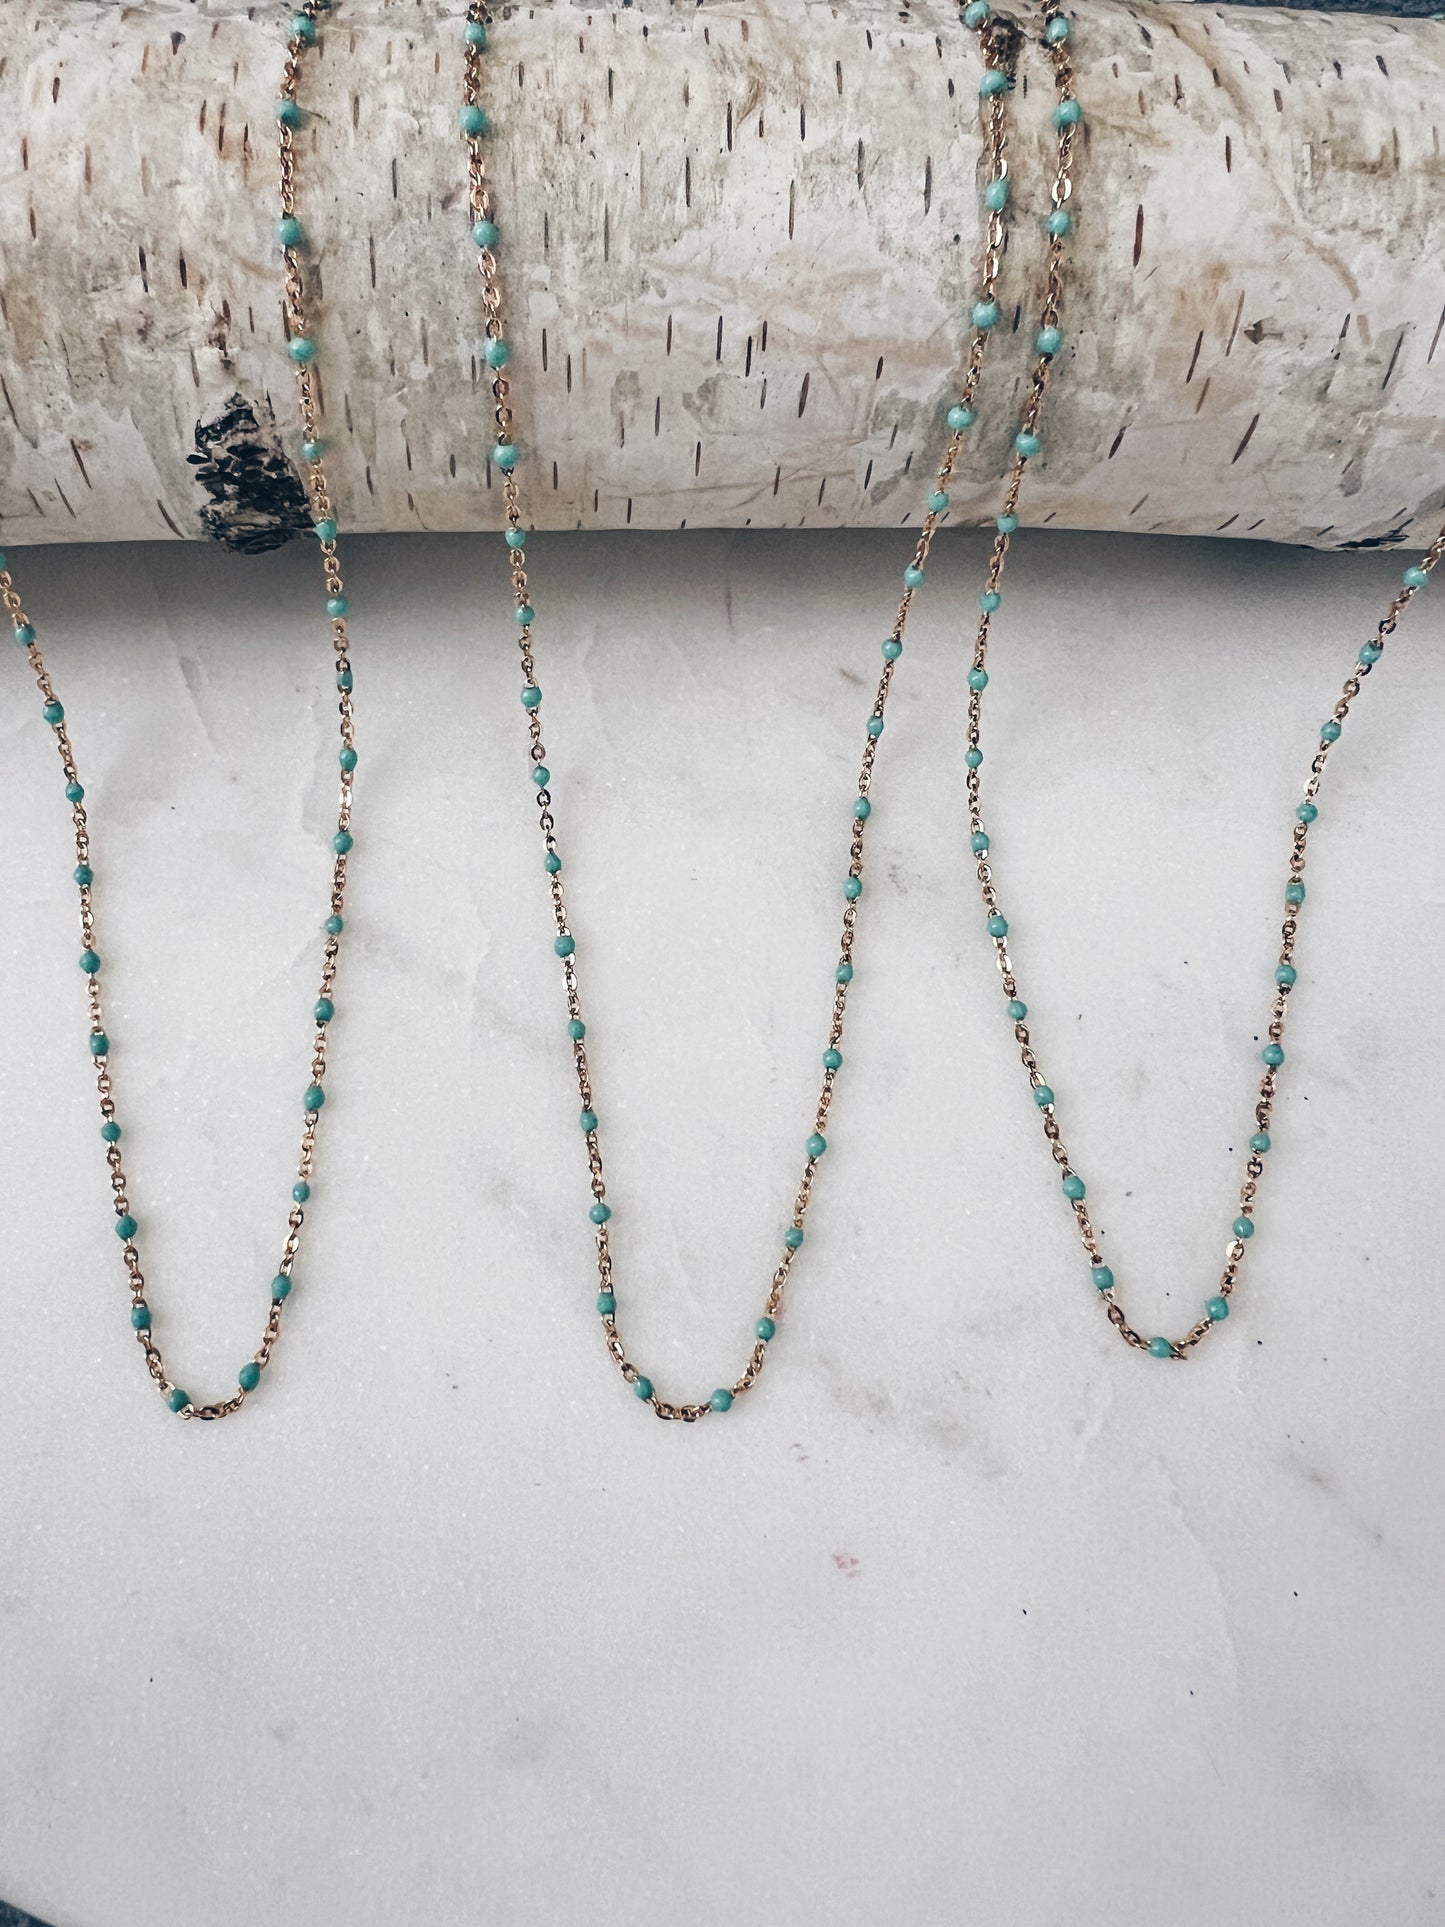 14k Gold Filled Dotted Enamel Bead Necklace + More Colors